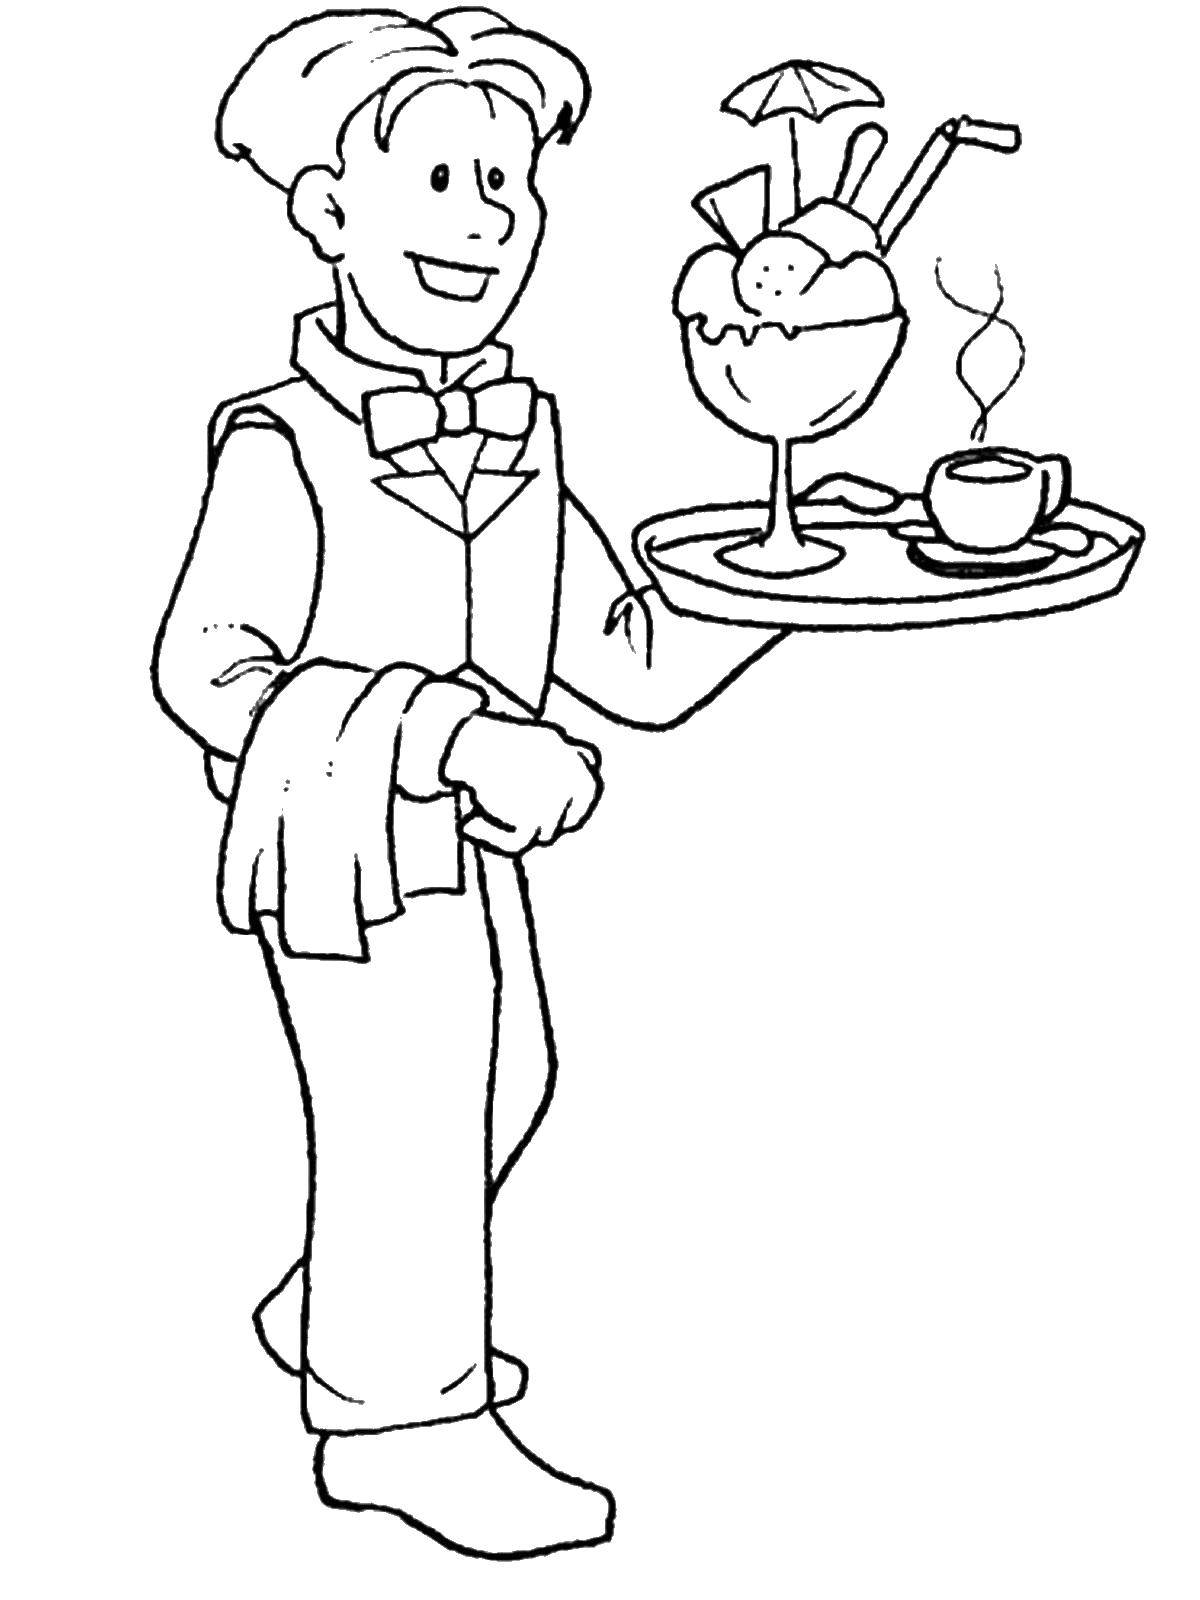 Coloring The waiter. Category a profession. Tags:  professions, waiter.